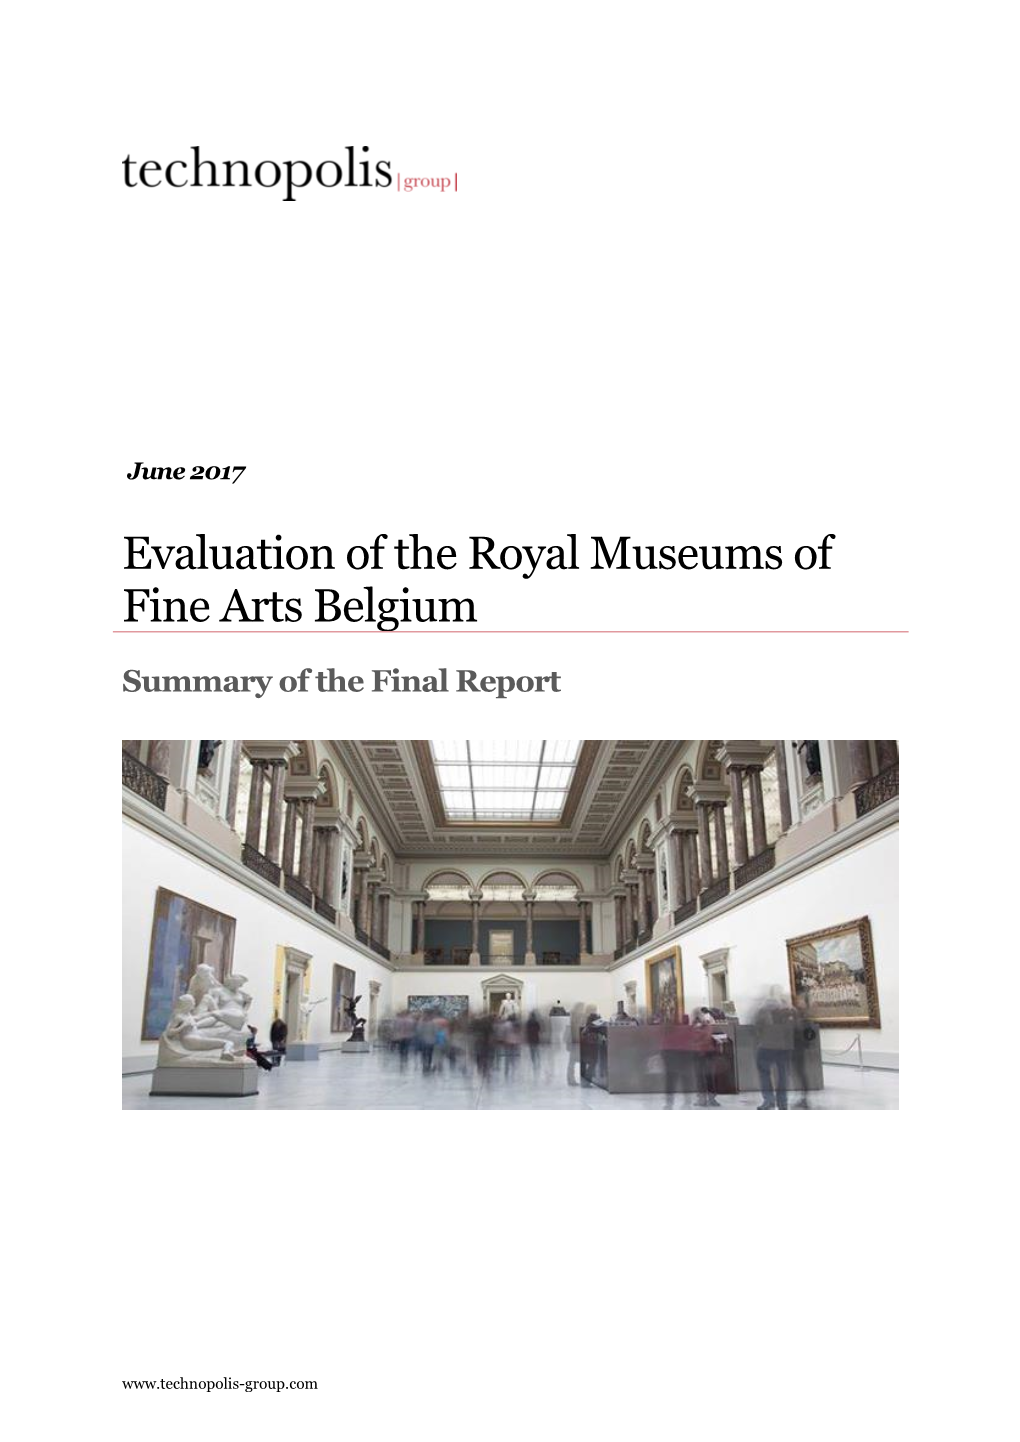 Evaluation of the Royal Museums of Fine Arts Belgium